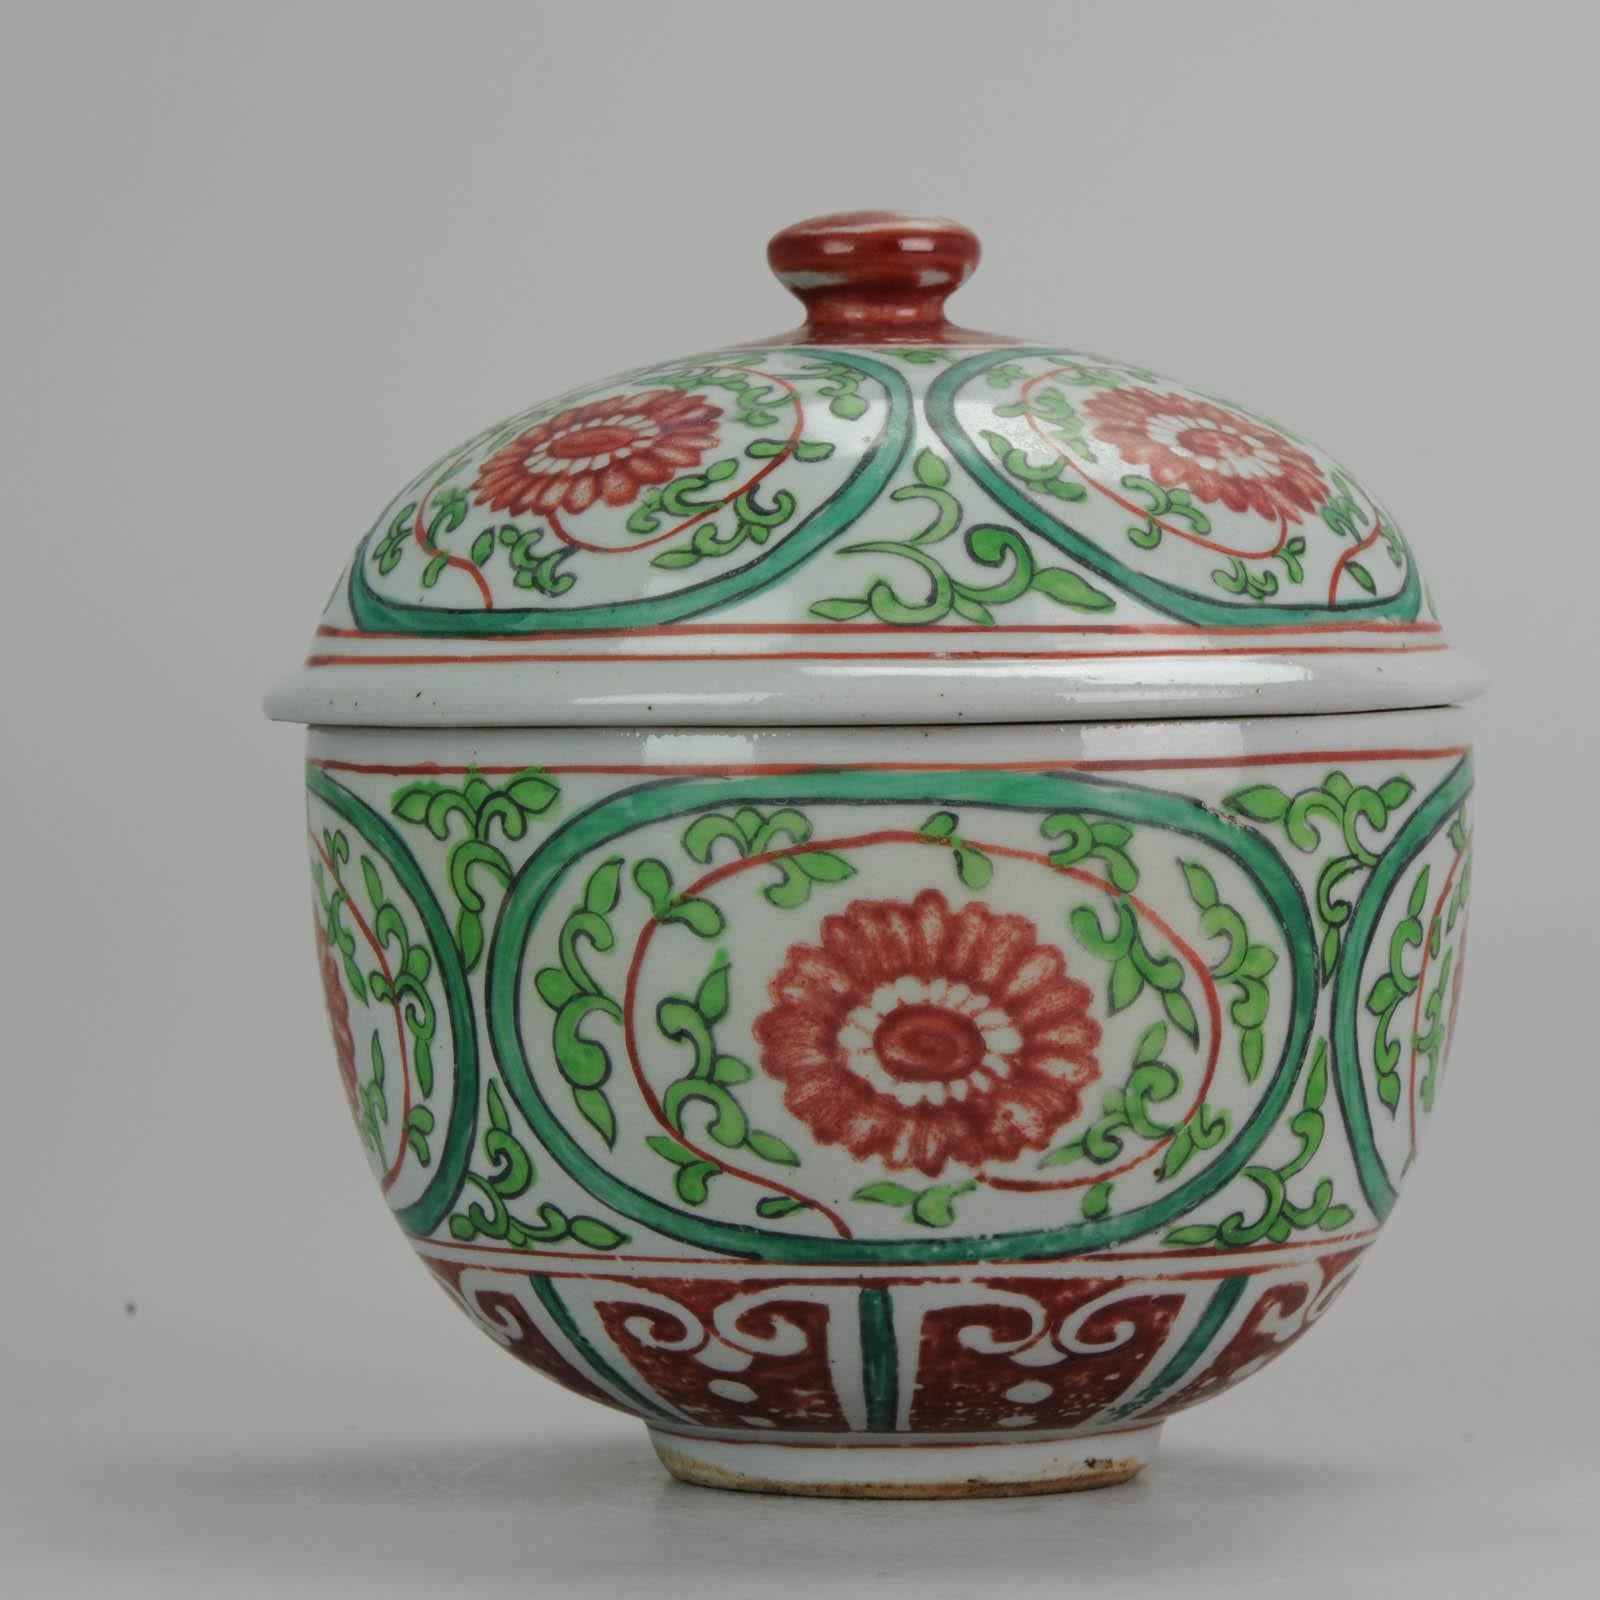 Antique Chinese Porcelain Jar 18th Century SE Asian Thai Market Bencharong Peony For Sale 1